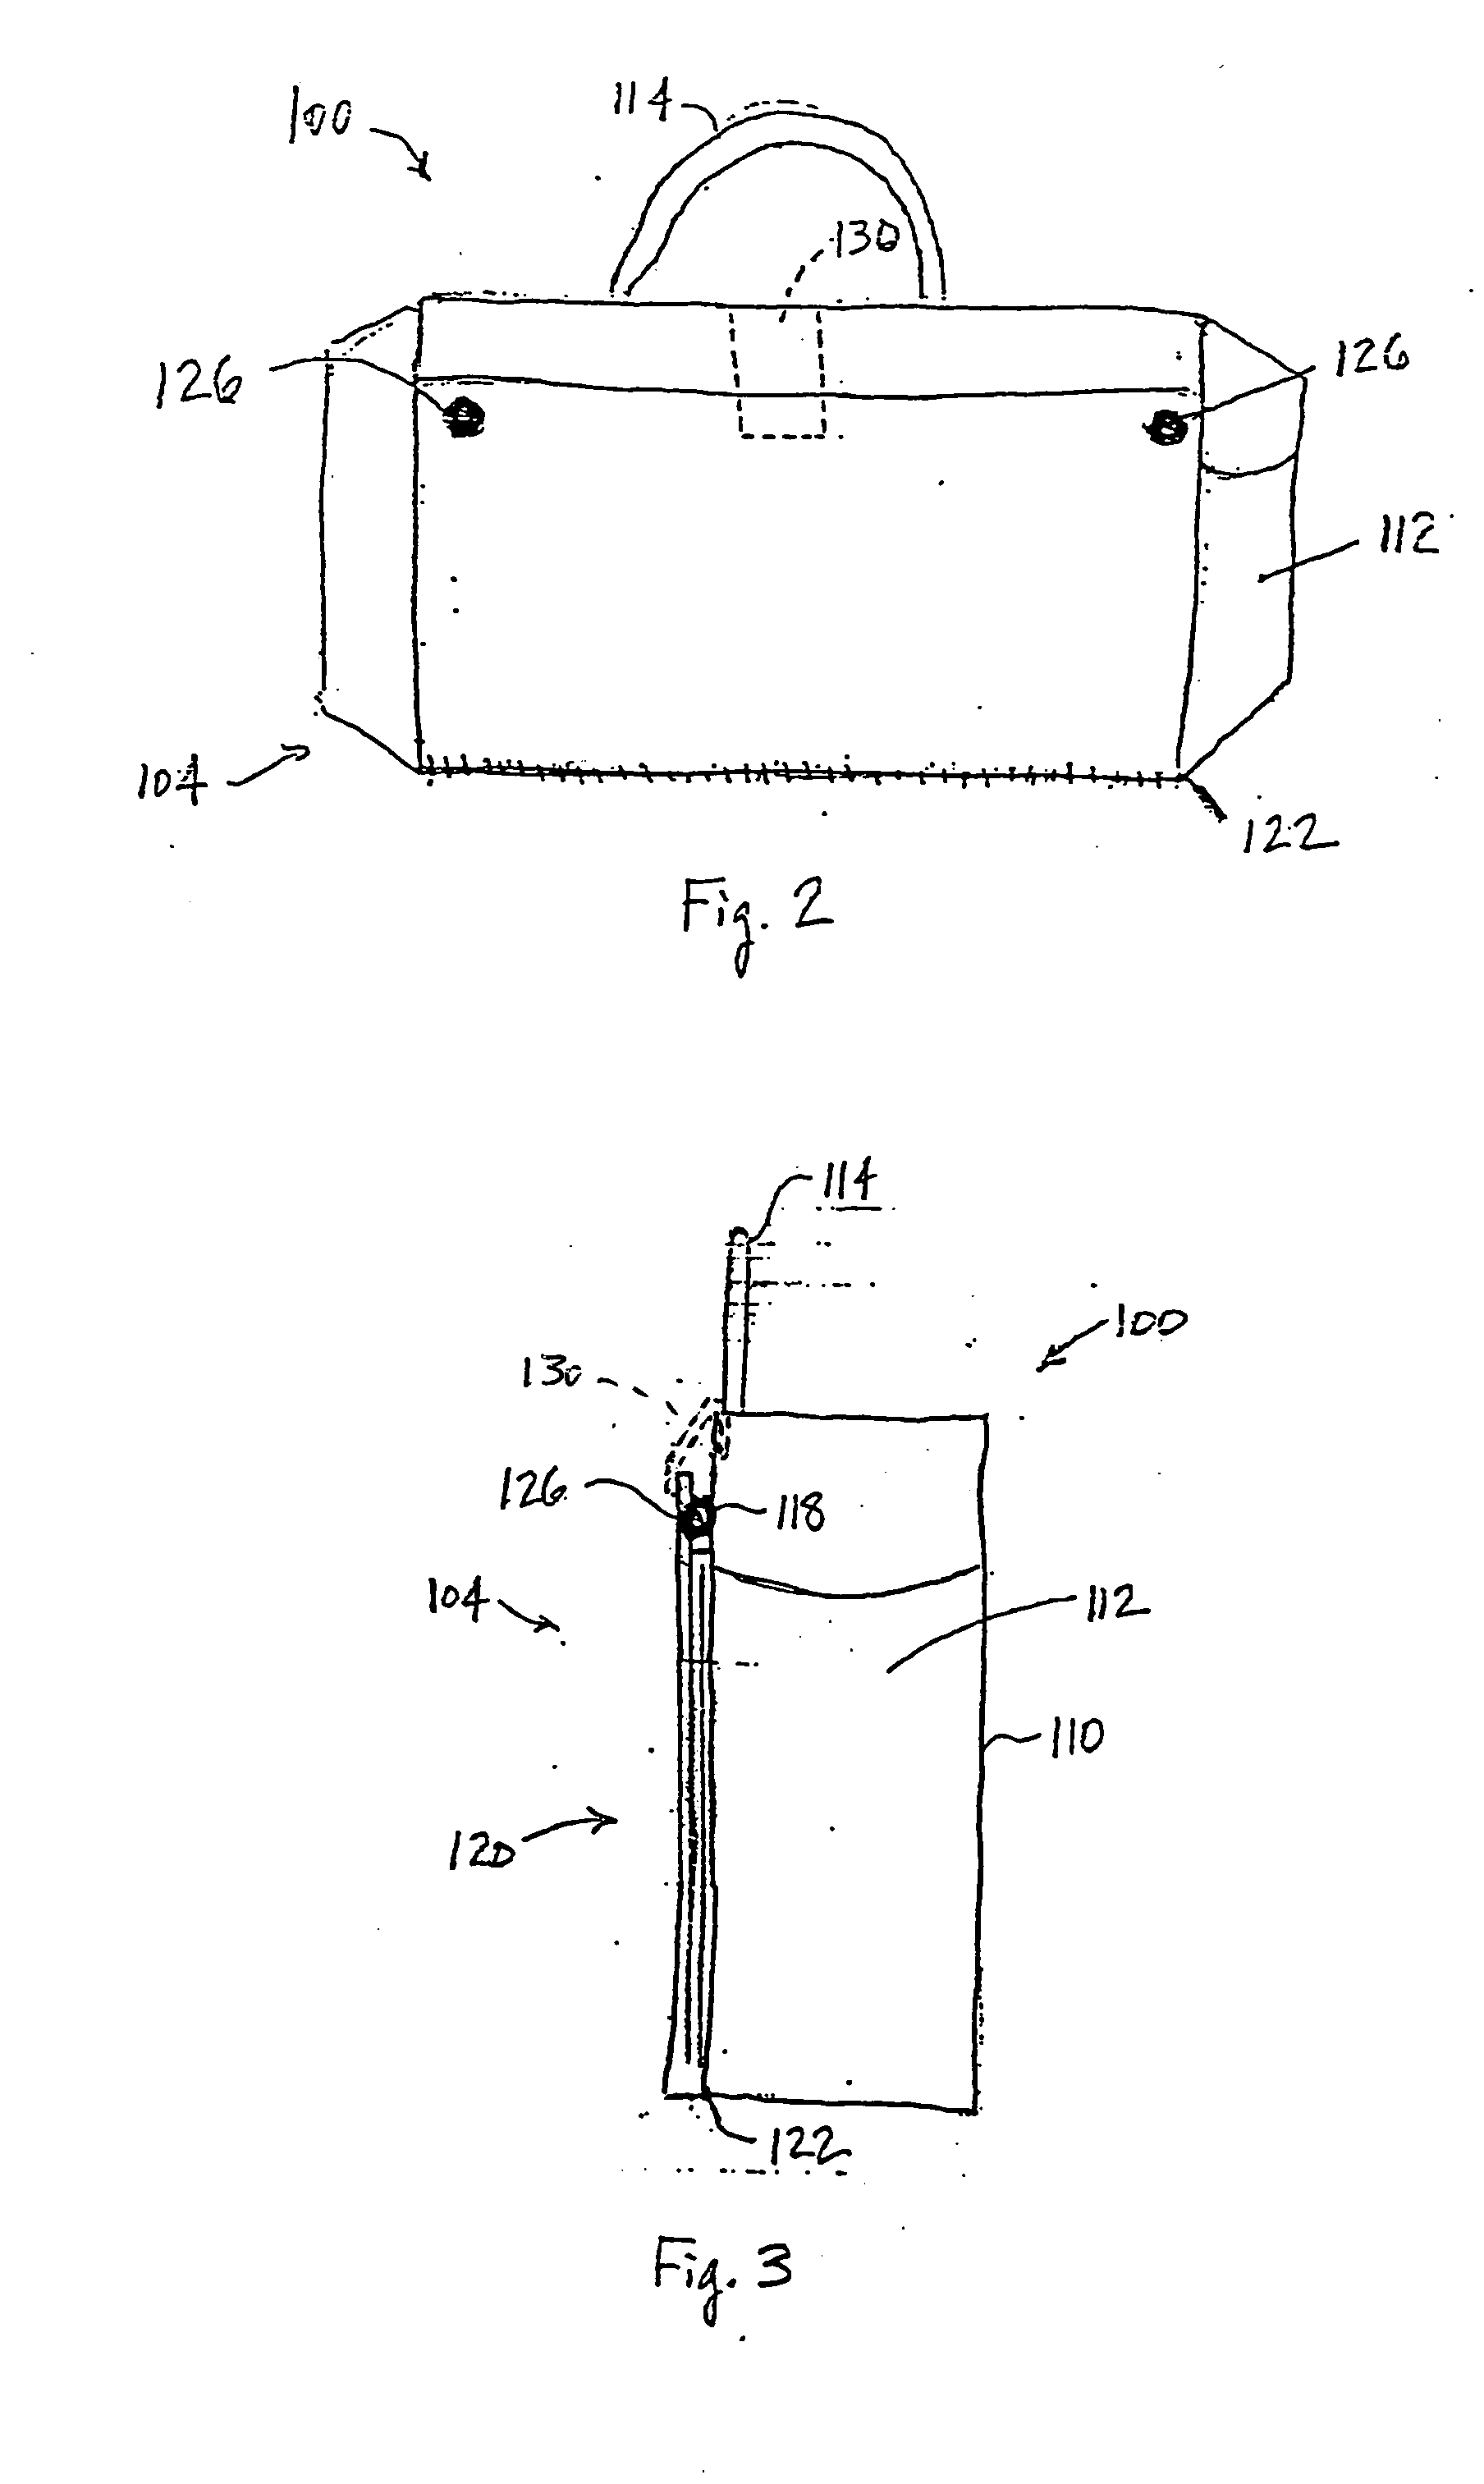 Diaper changing apparatus and methods